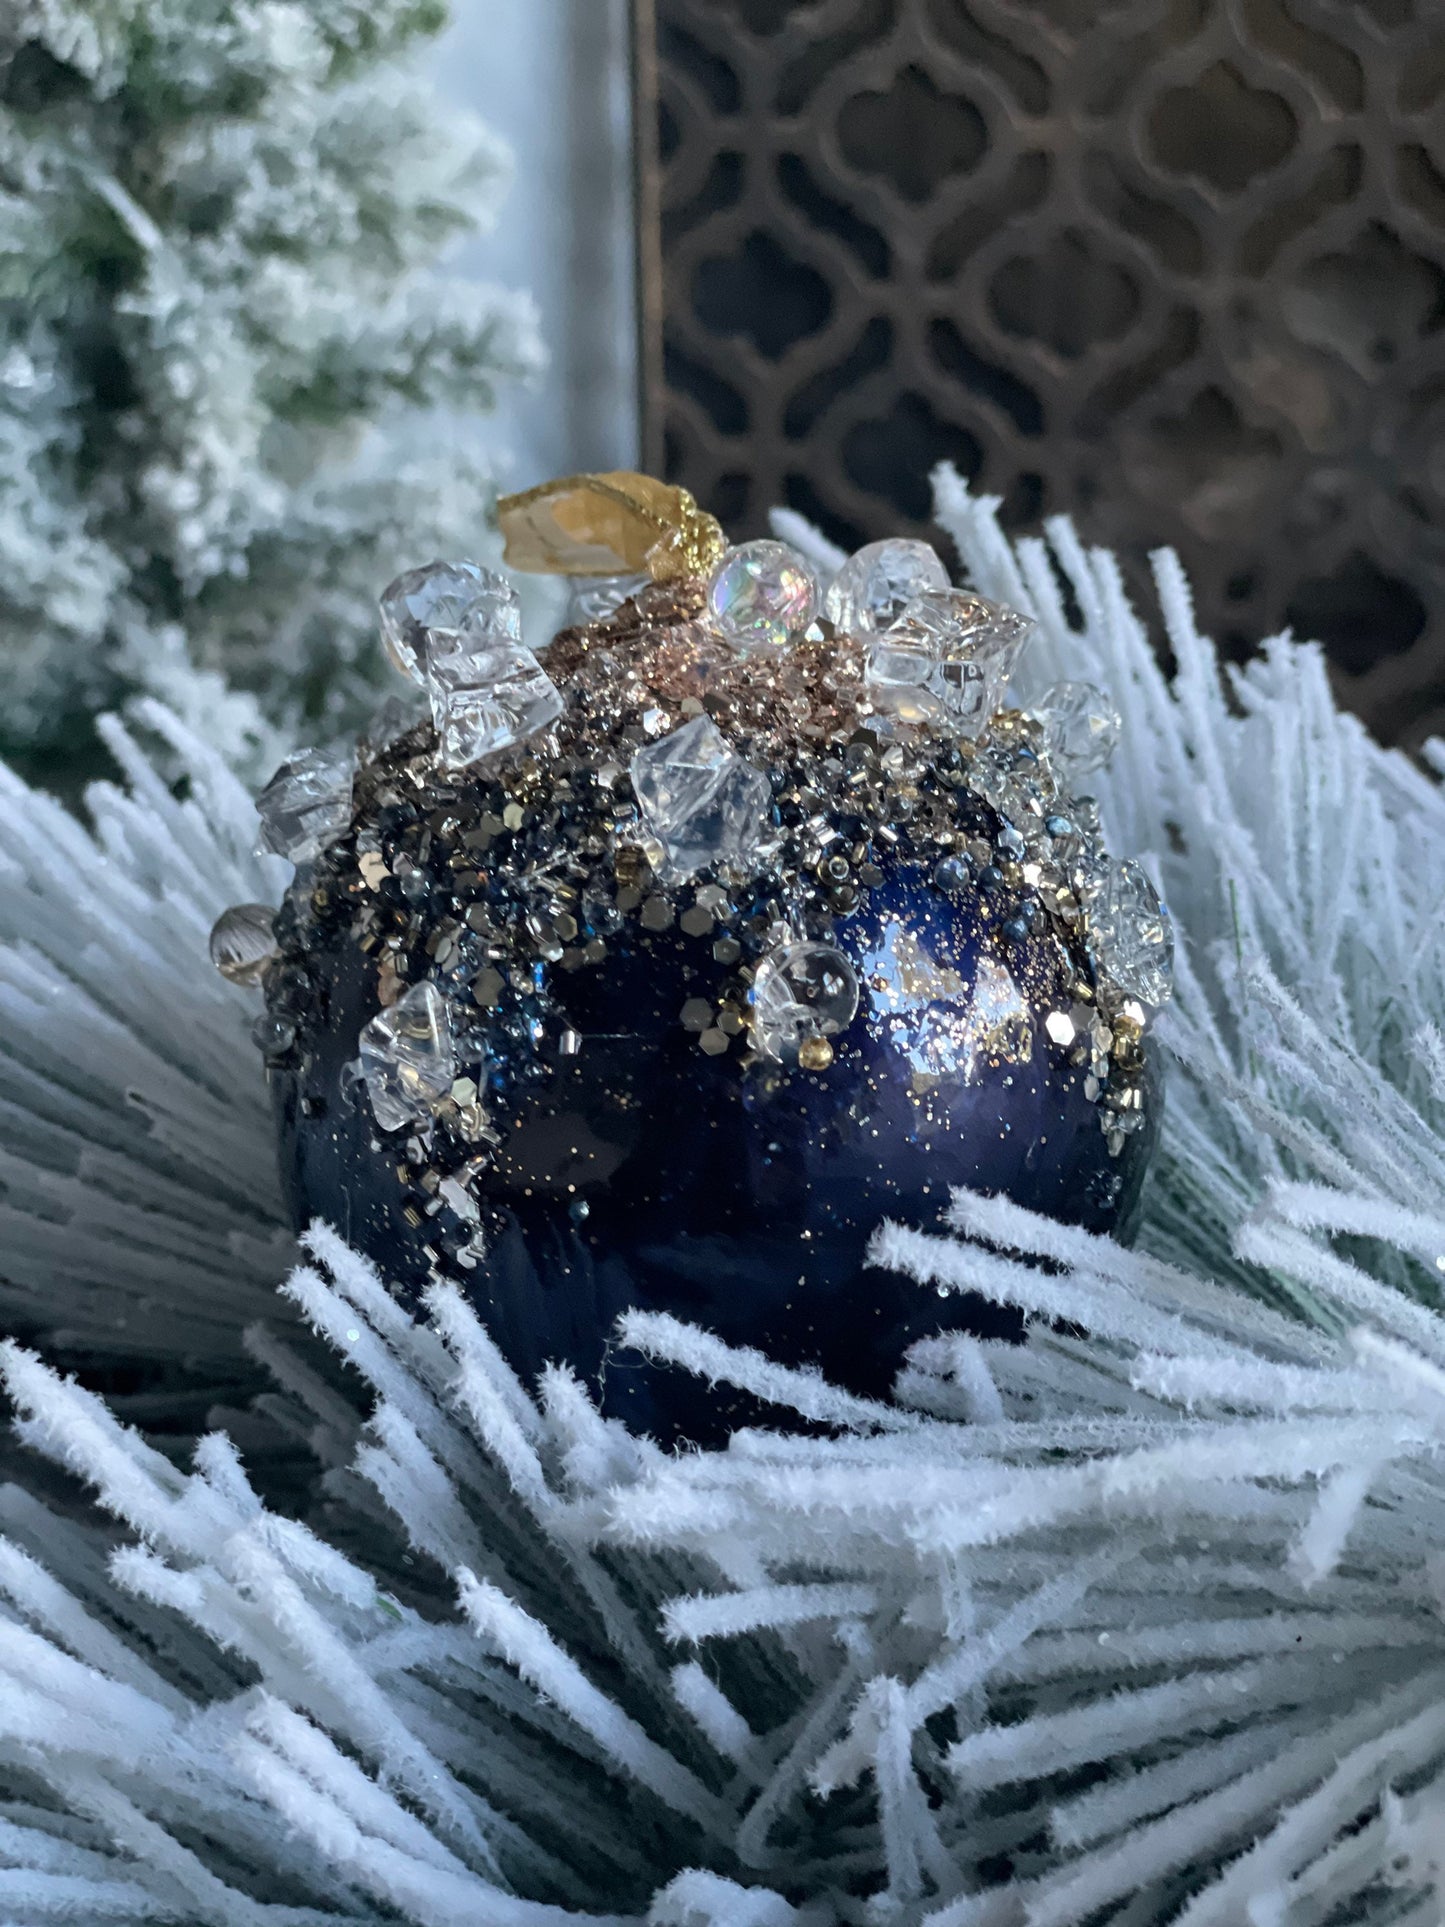 4"Heavy jeweled ball ornament. Blue/ Sapphire and gold.